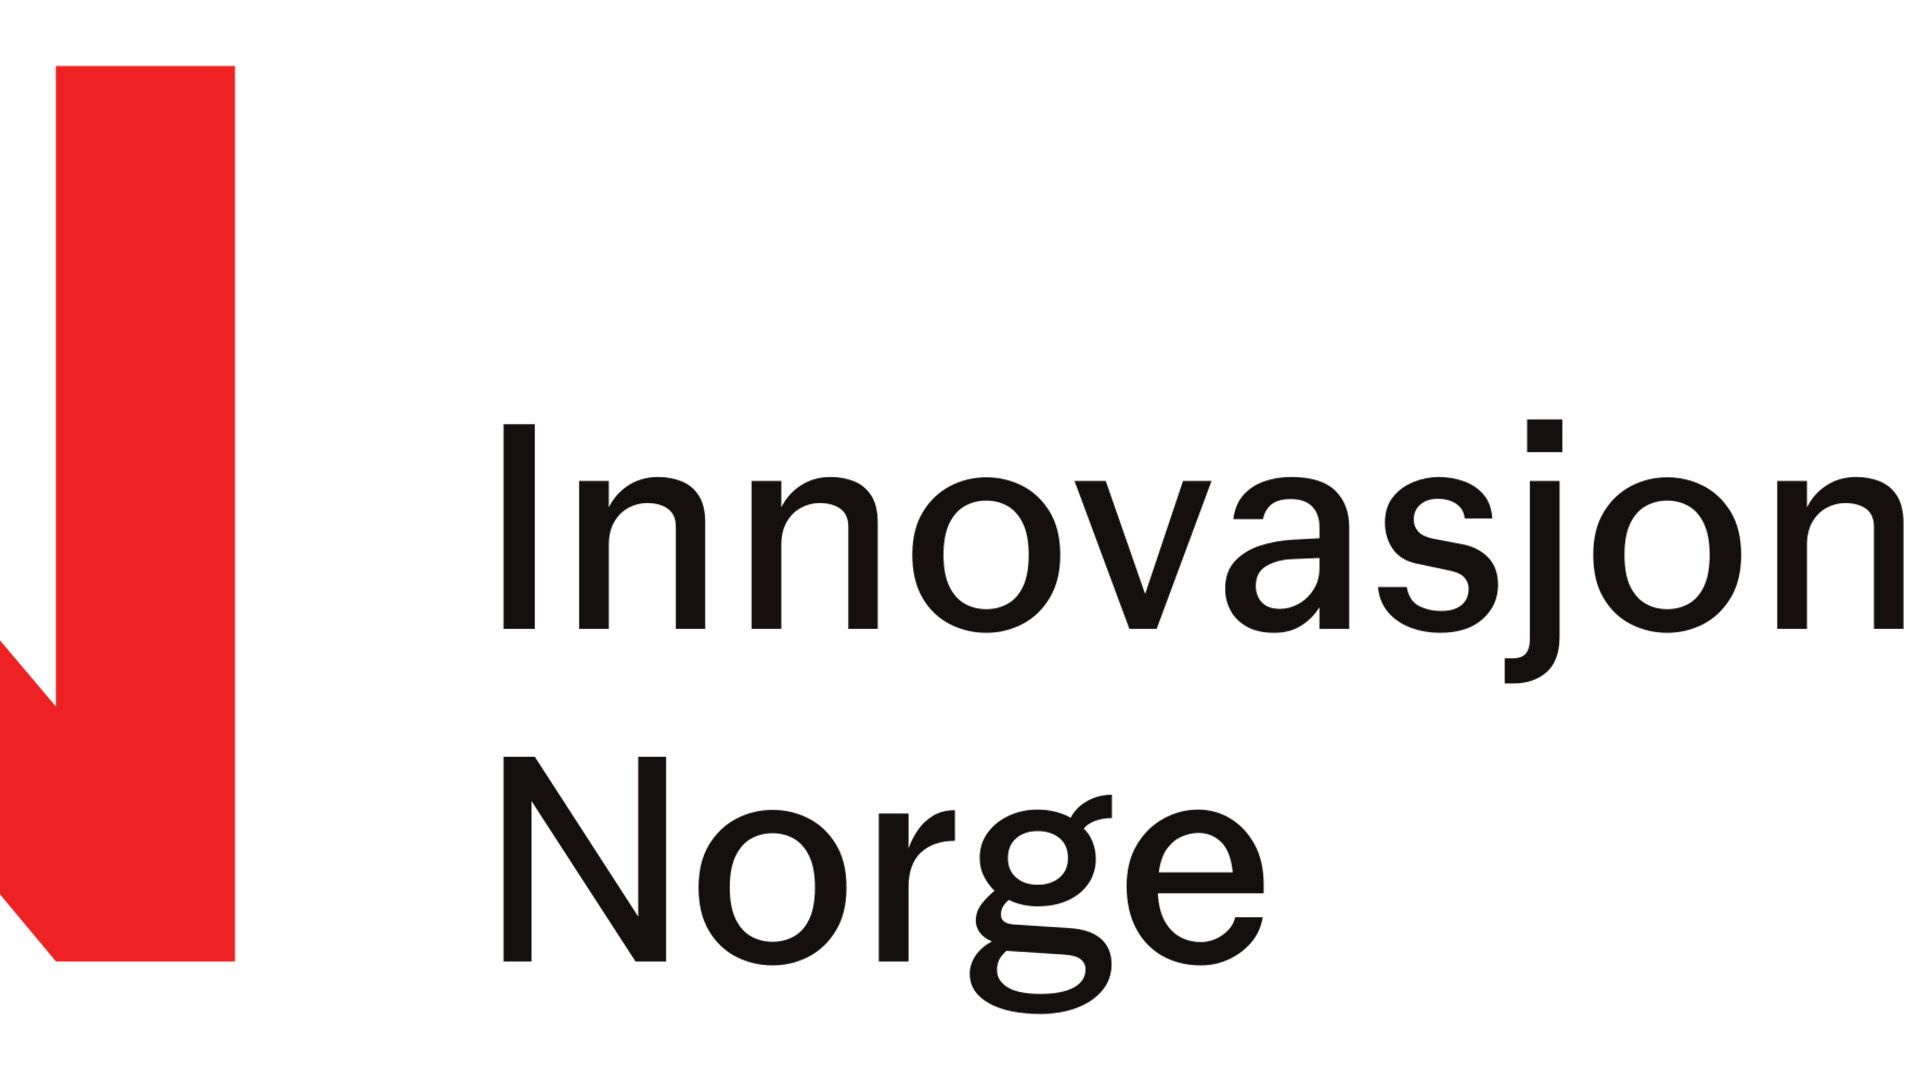 Cover Image for Broadcast has received mentoring grant from Innovation Norway!